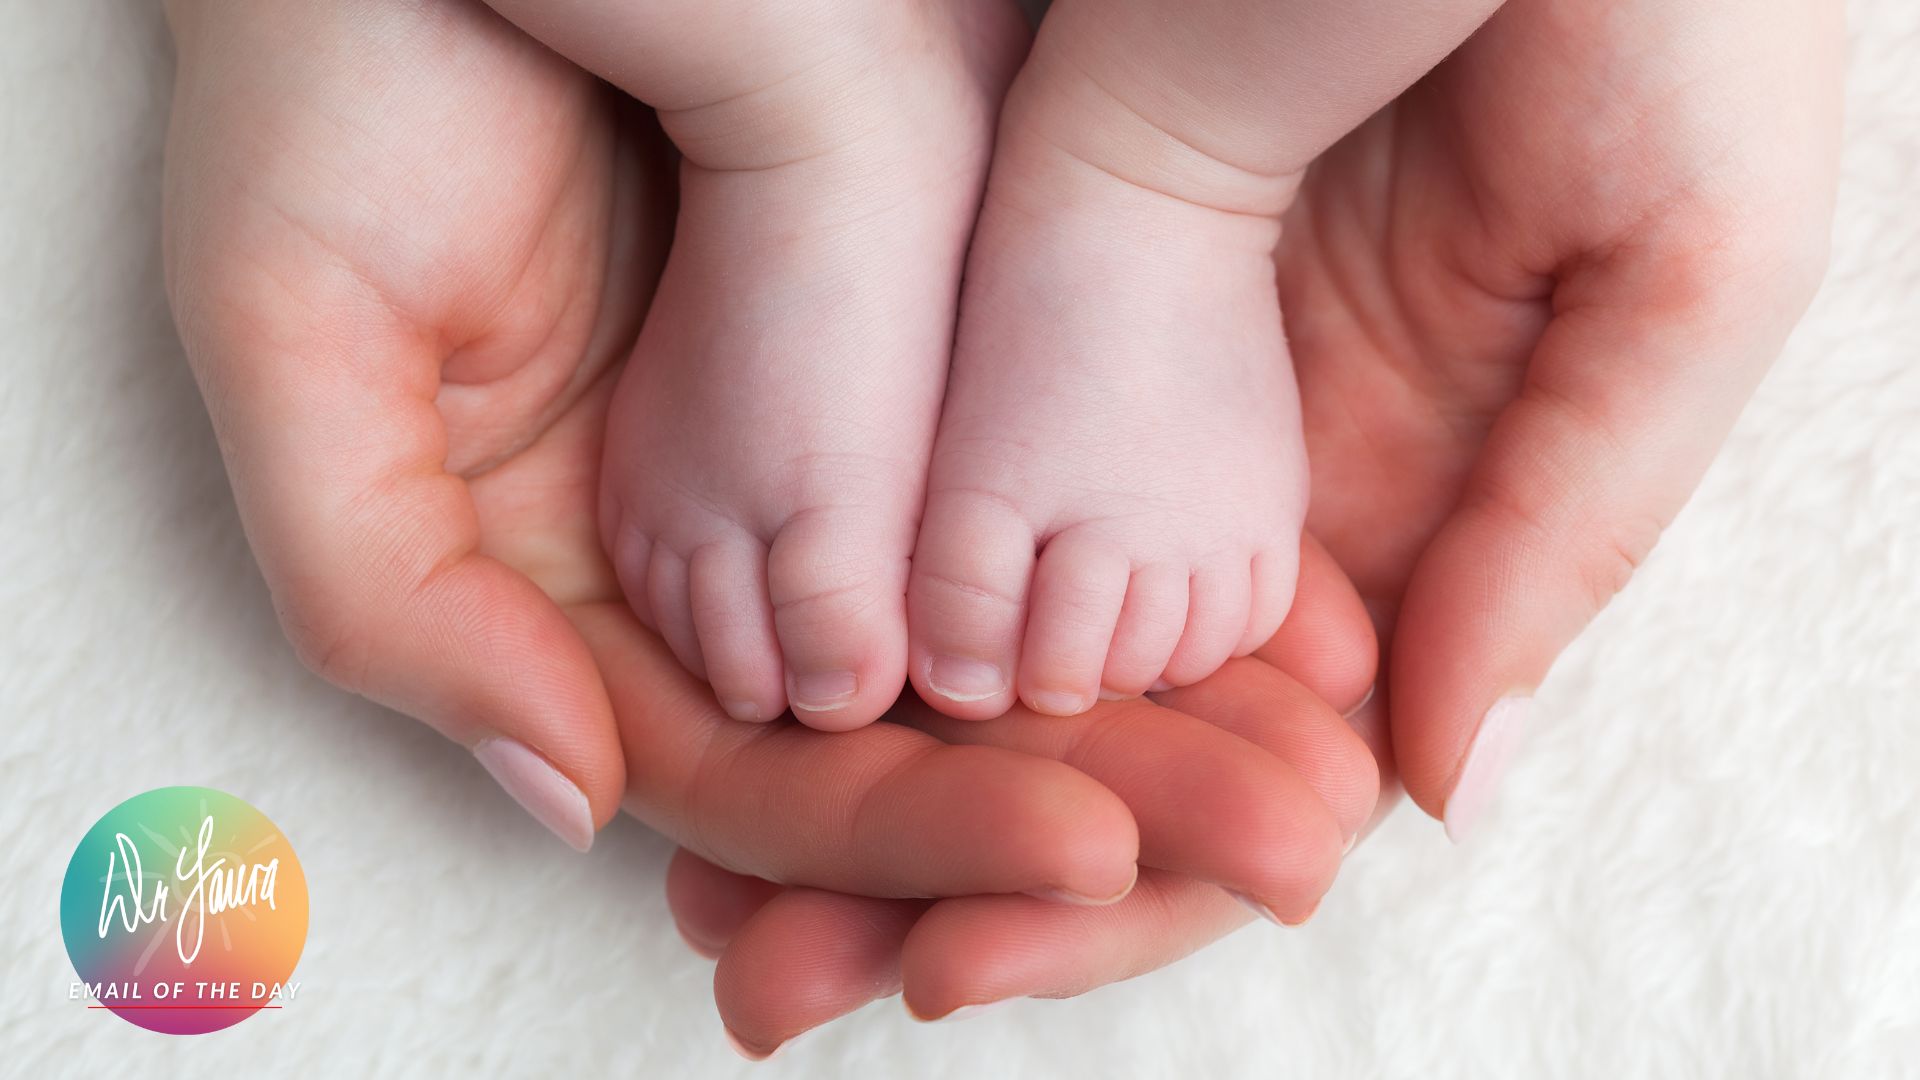 Adult hands cup and hold an infant's feet